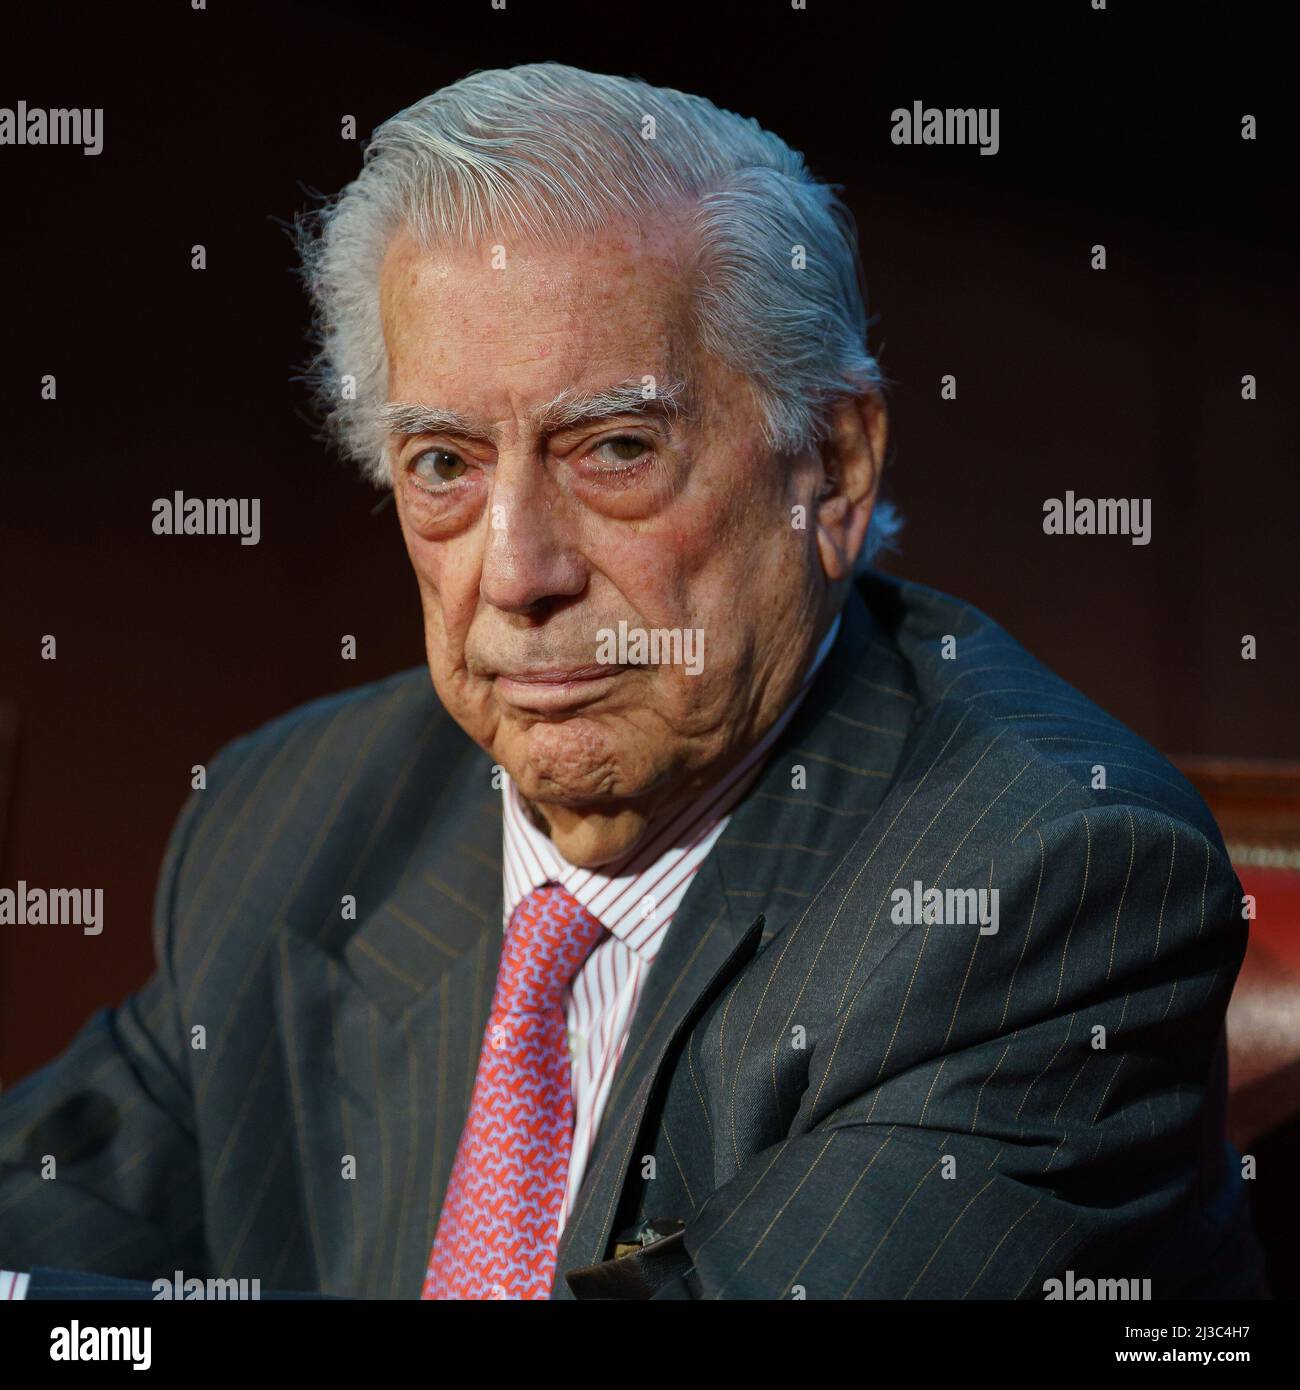 Madrid, Spain. 07th Apr, 2022. The writer and Nobel Prize winner Mario Vargas Llosa presents the book 'The Still Gaze (by Pérez Galdós)' (La mirada quieta) at the Ateneo de Madrid in Spain. Vargas Llosa, who won the Nobel Prize for Literature in 2010, has written this essay based on the analysis of the novels, plays, and the National Episodes of Benito Perez Galdos. With this publication, Llosa creates a complete and personal profile of the Spanish writer. (Photo by Atilano Garcia/SOPA Images/Sipa USA) Credit: Sipa USA/Alamy Live News Stock Photo